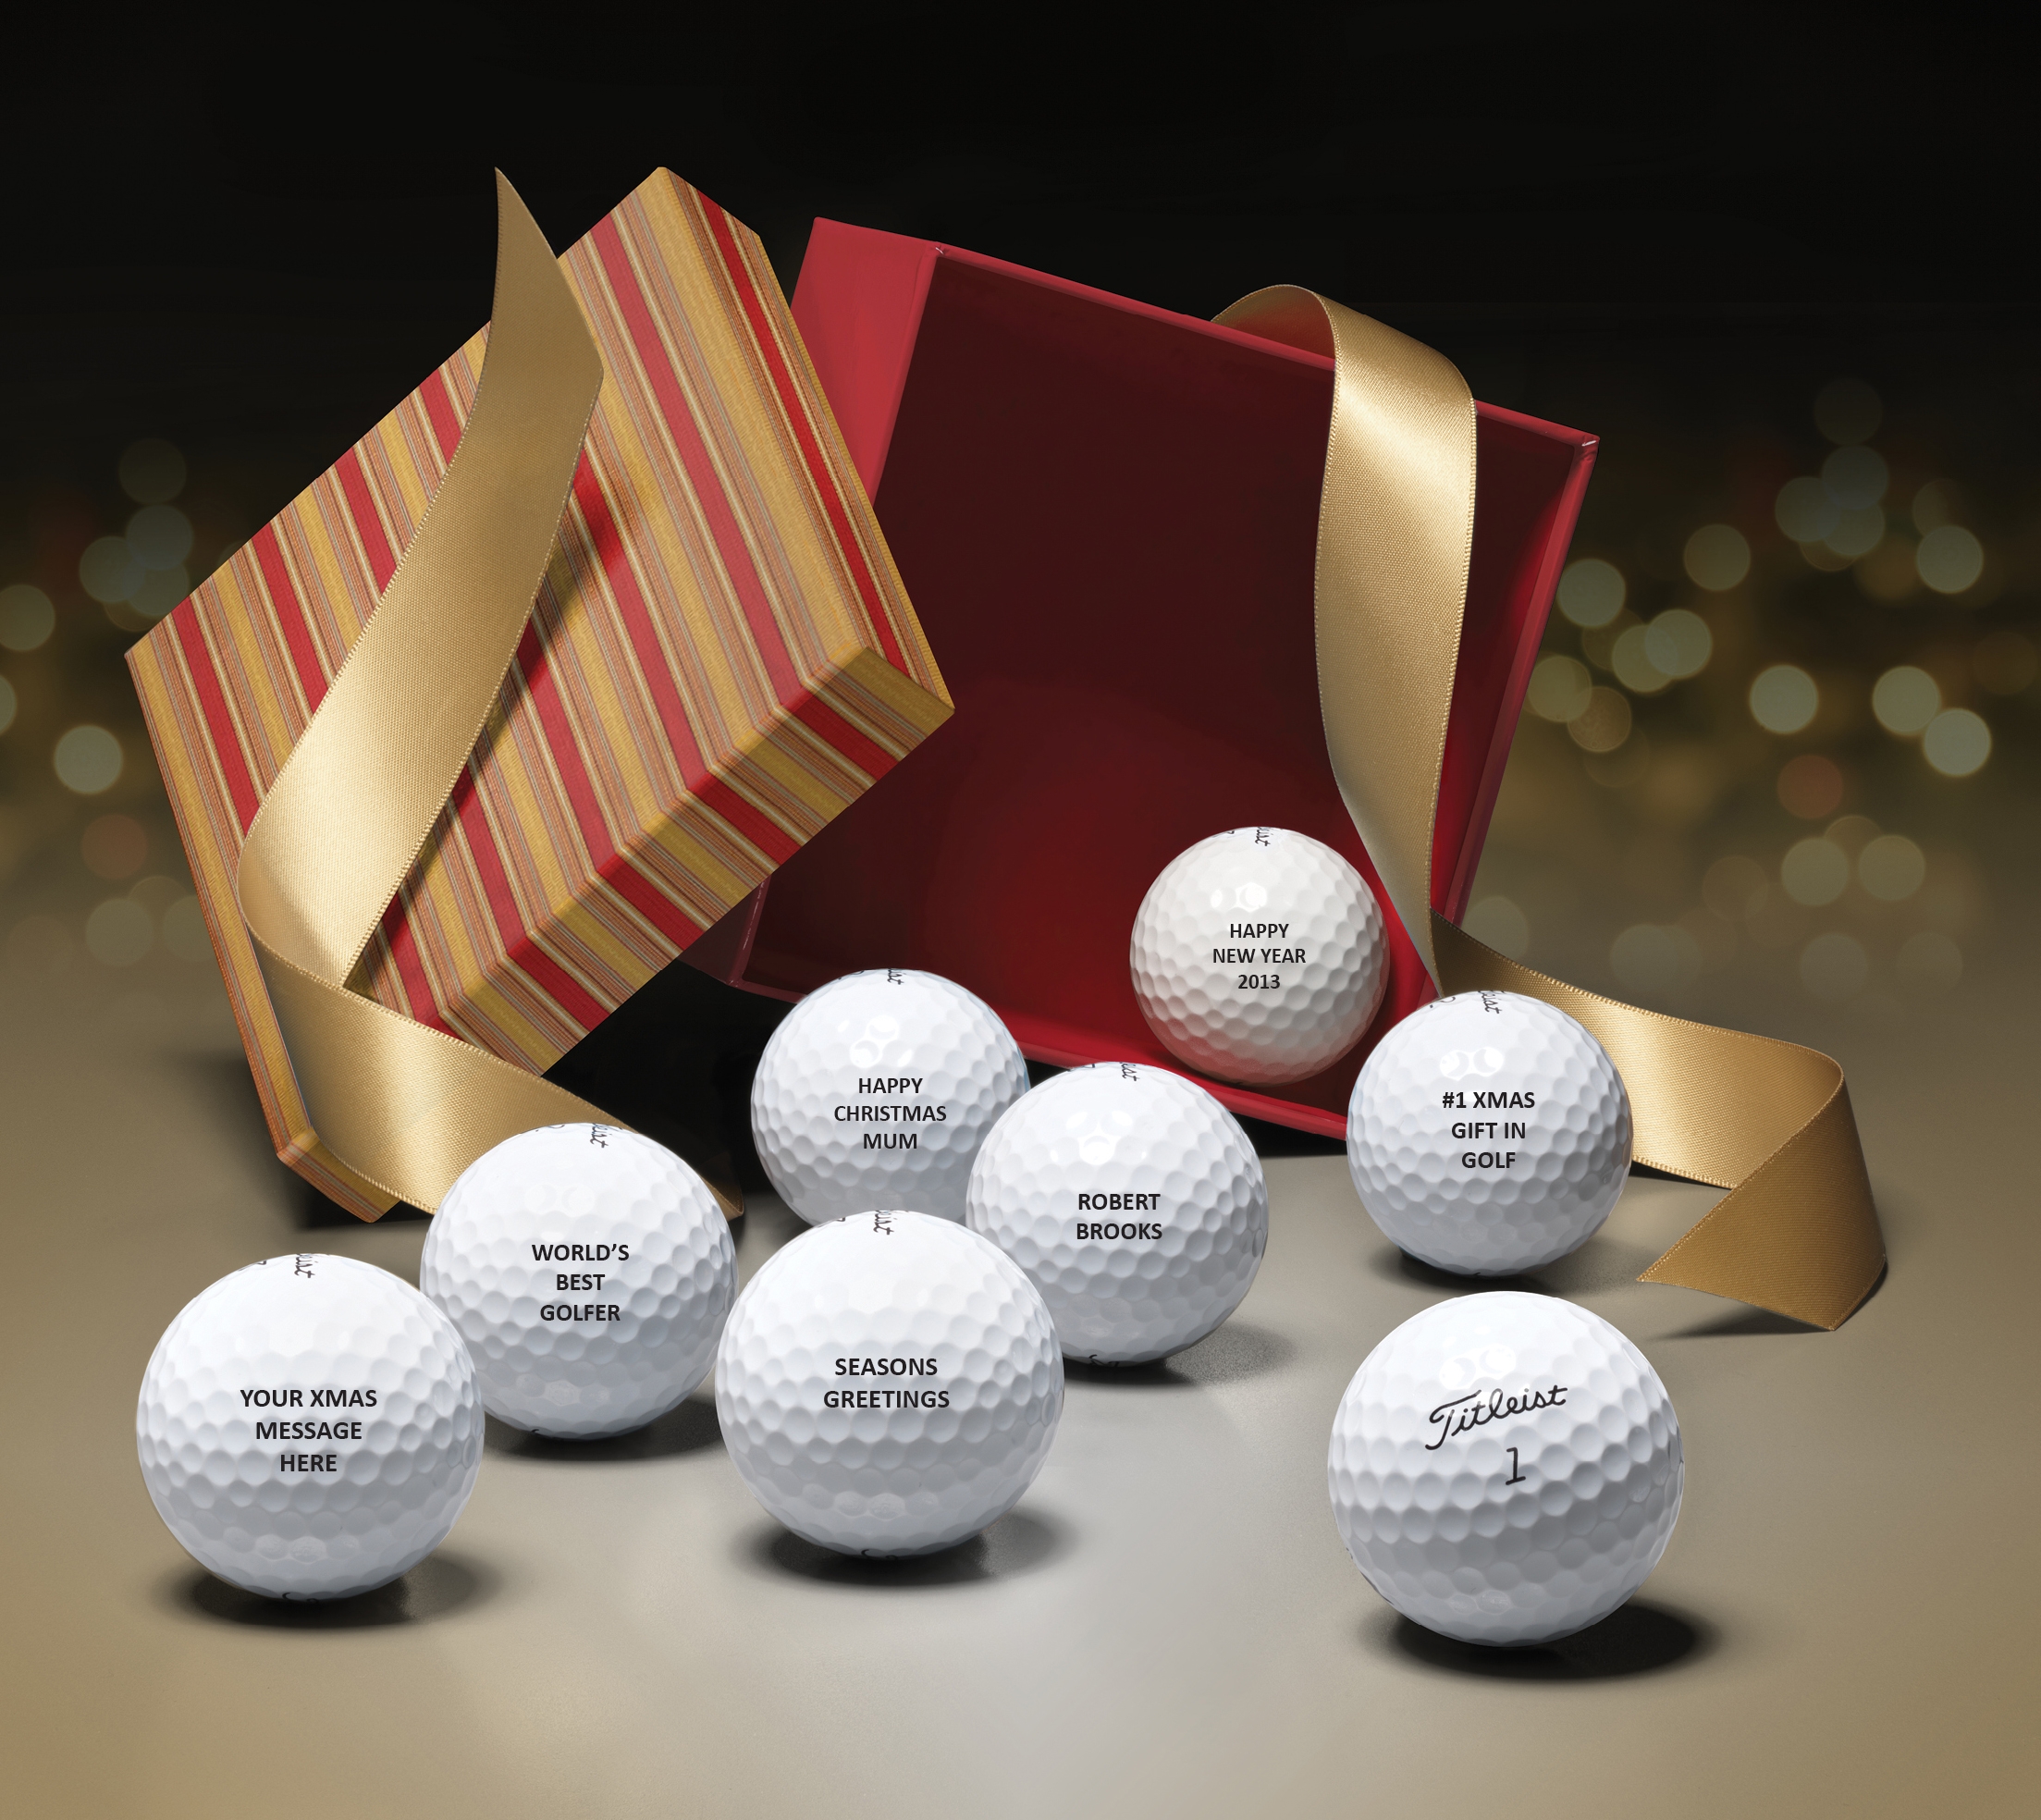 Have a ball this Christmas with Titleist